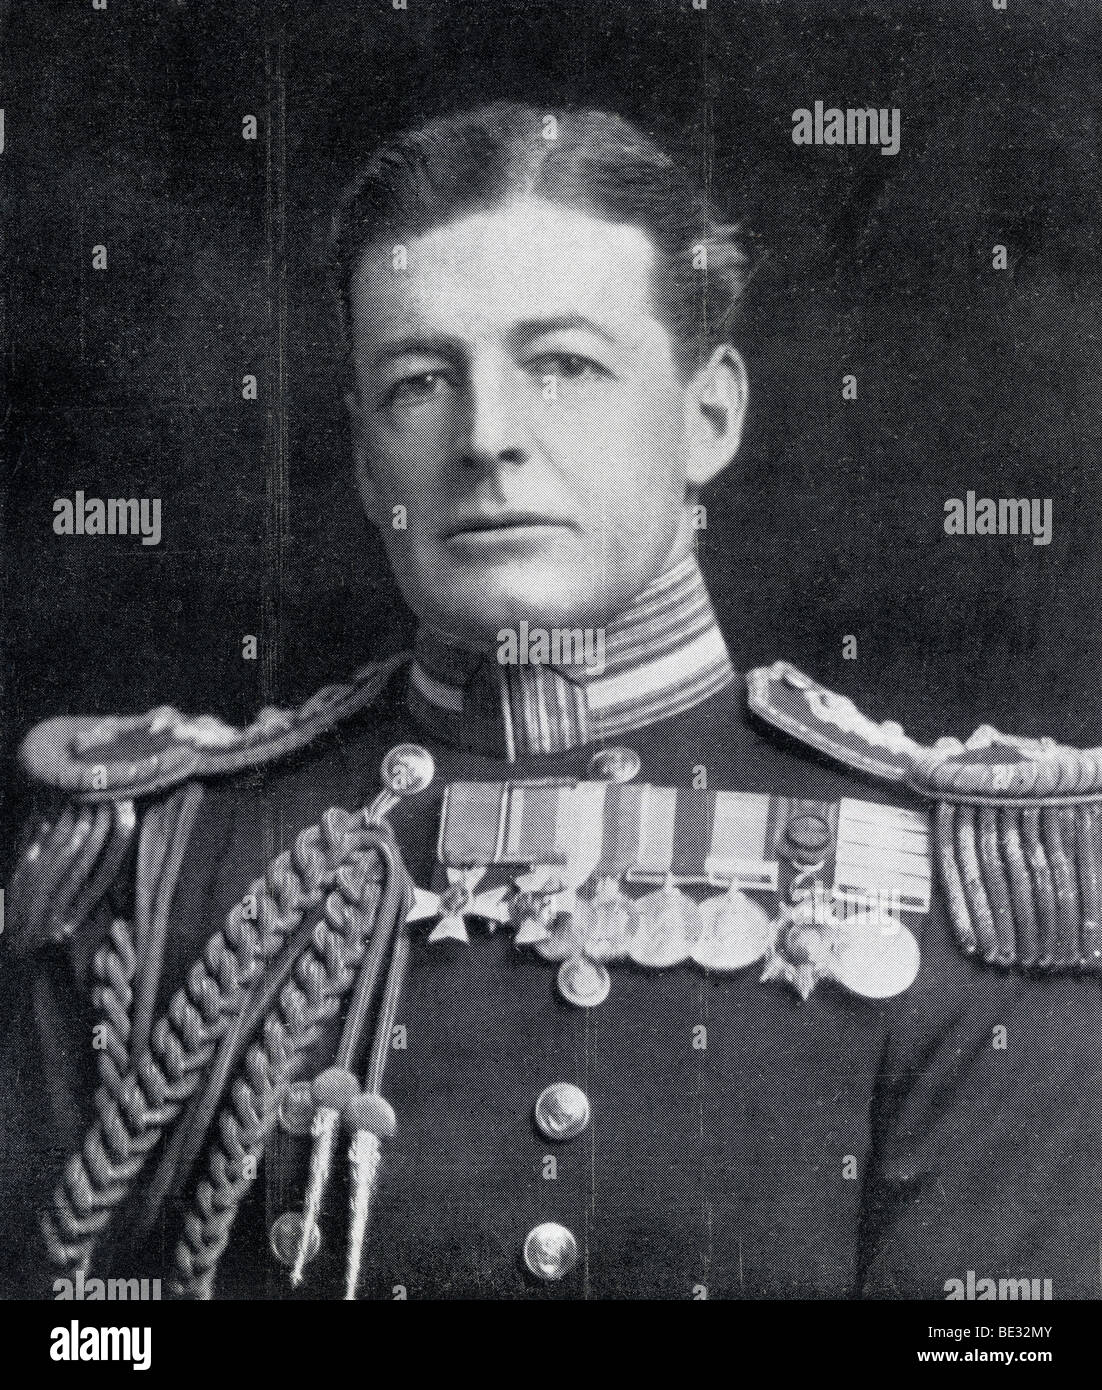 David Beatty, 1st Earl Beatty, 1871 to 1936.  Admiral of the fleet in the Royal Navy. Stock Photo